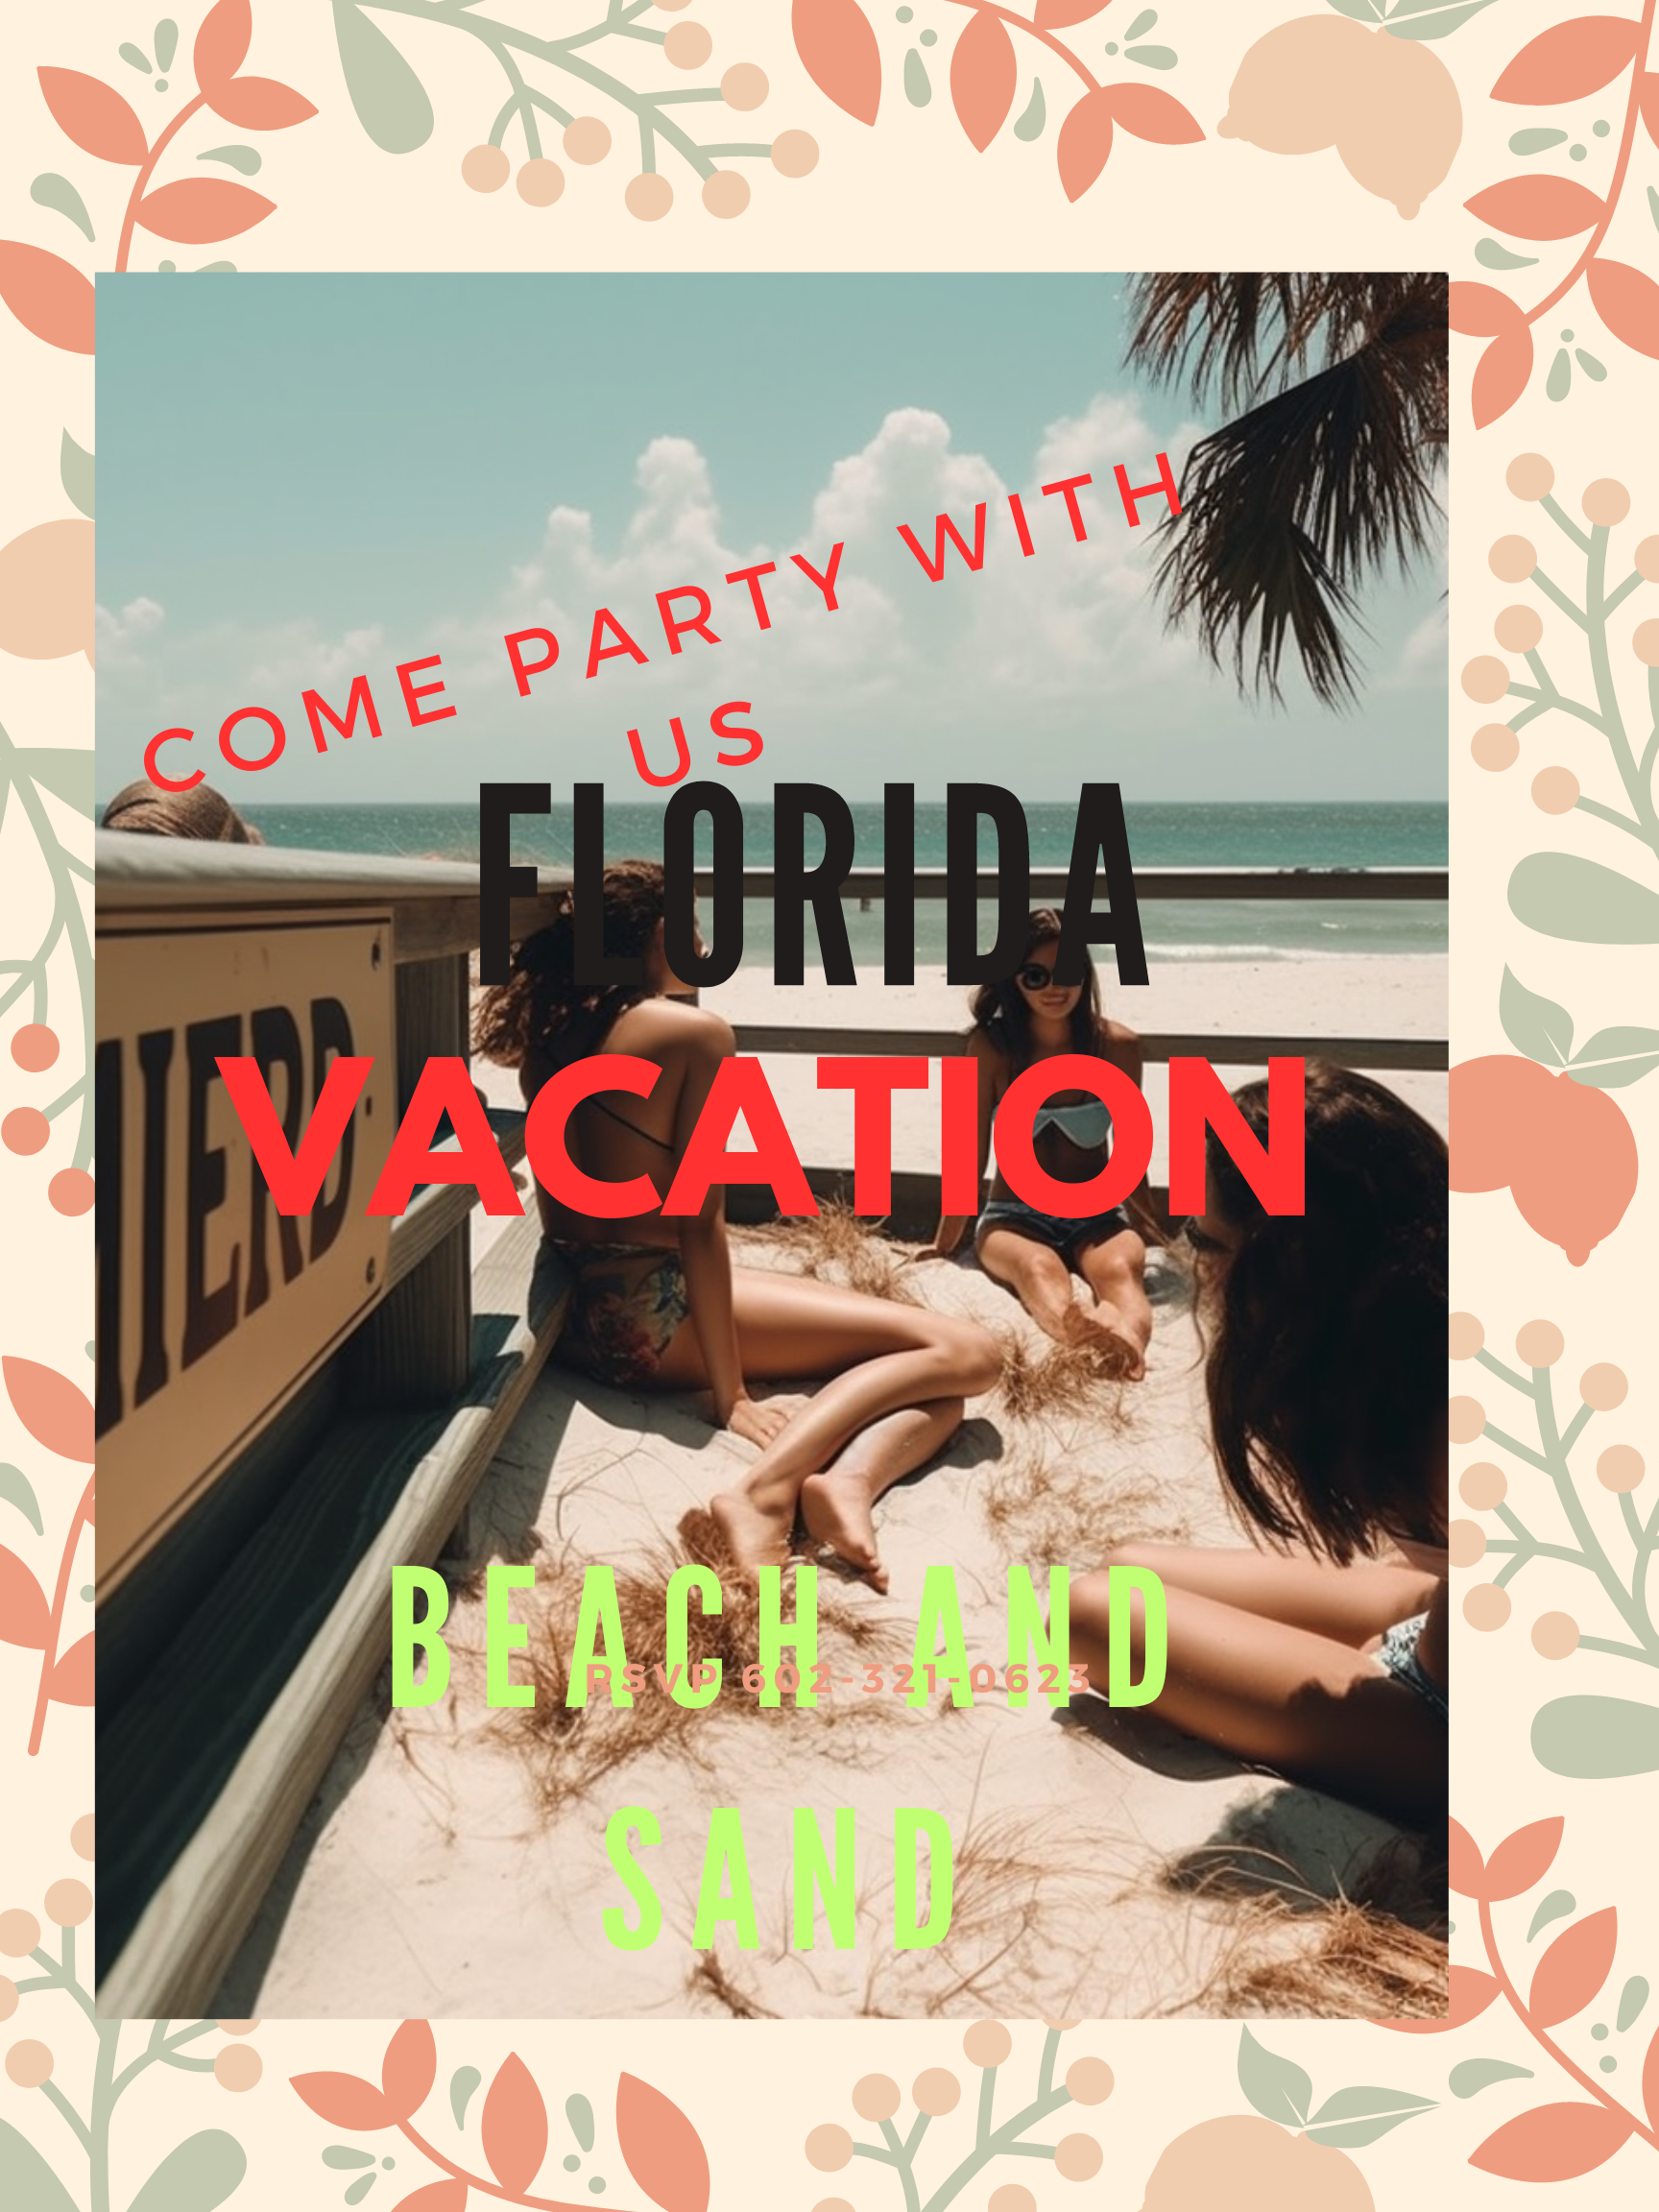 Florida summer vacation places to visit